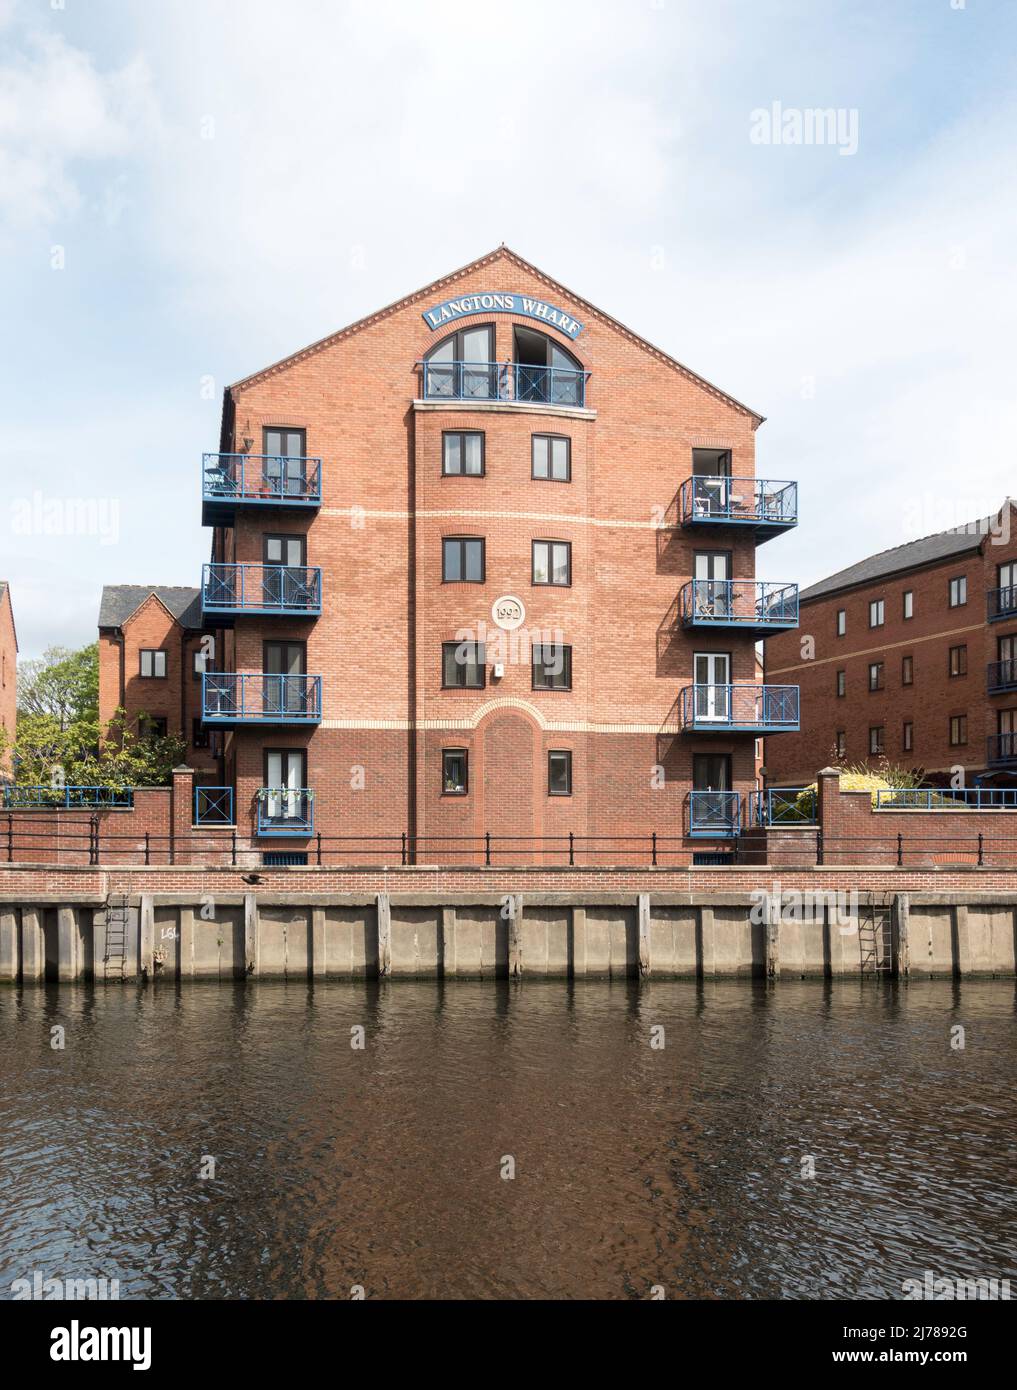 Langtons Wharf a riverside residential development alongside the river Aire in Leeds city centre, Yorkshire, England, UK Stock Photo